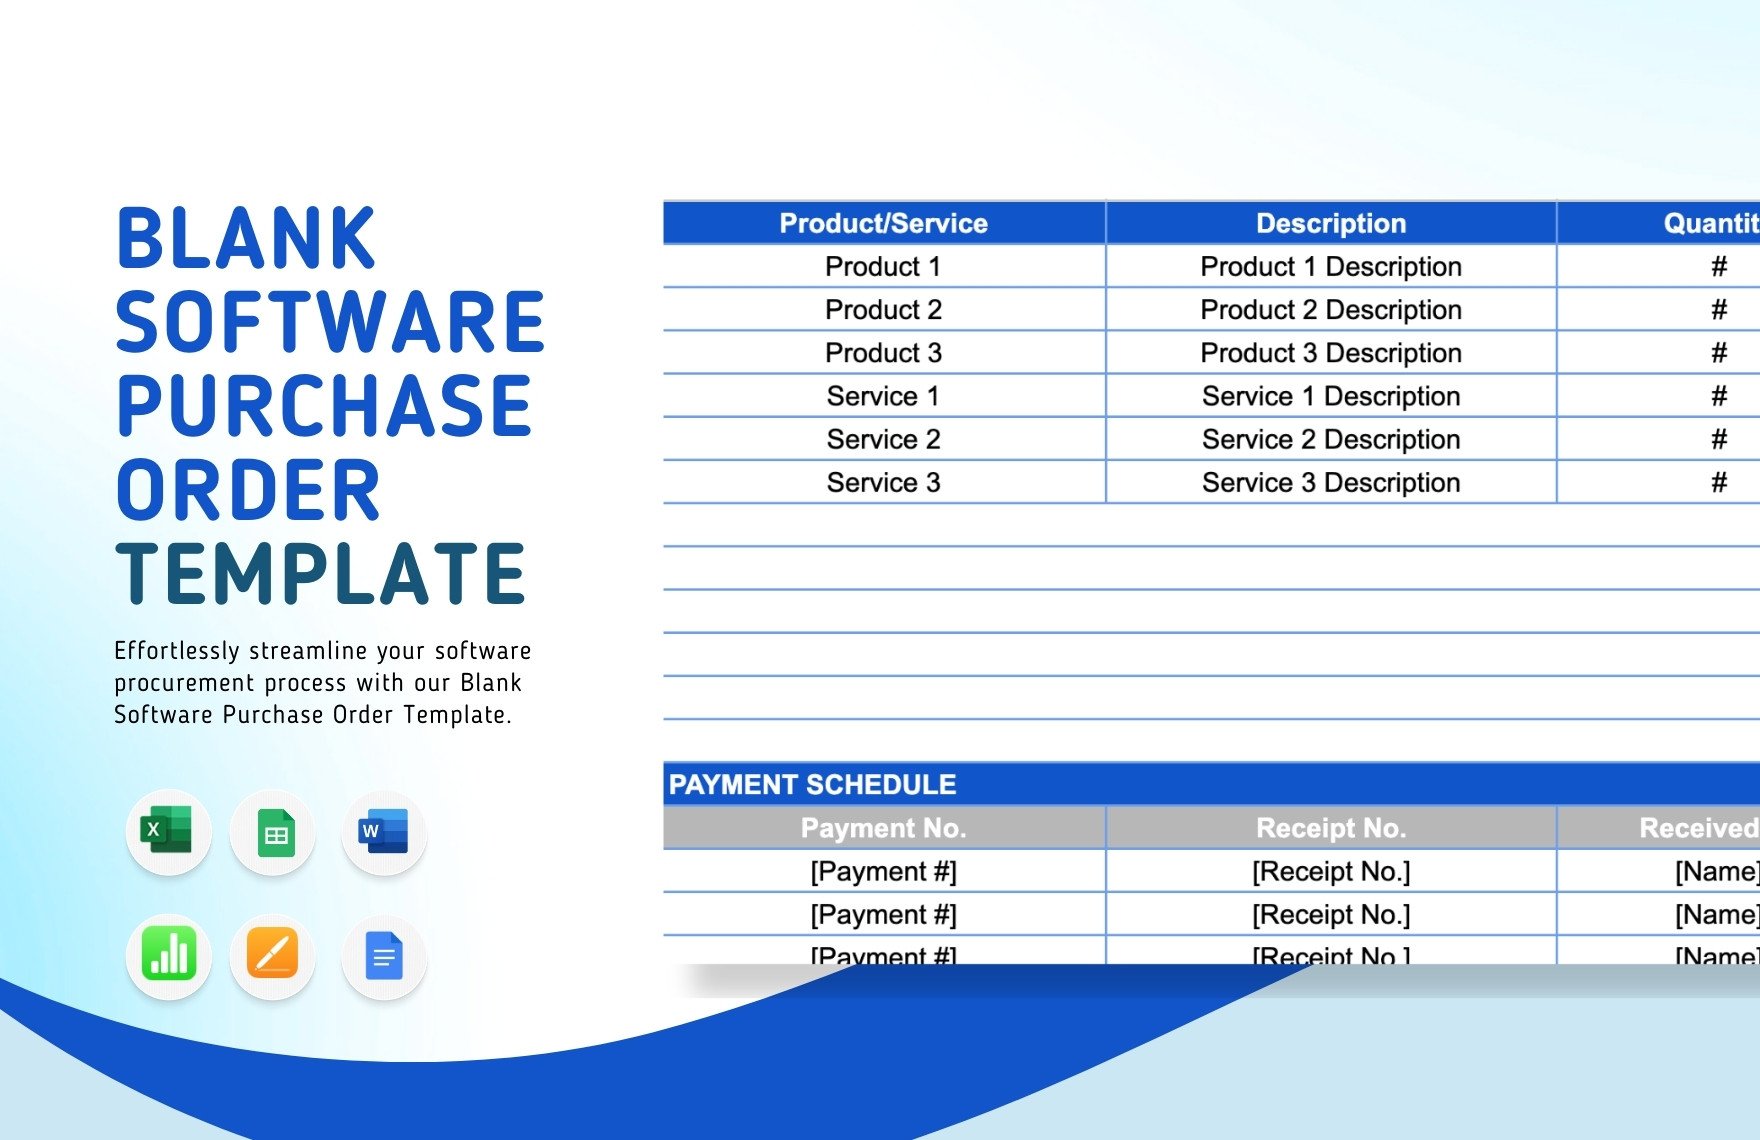 Blank Software Purchase Order Template